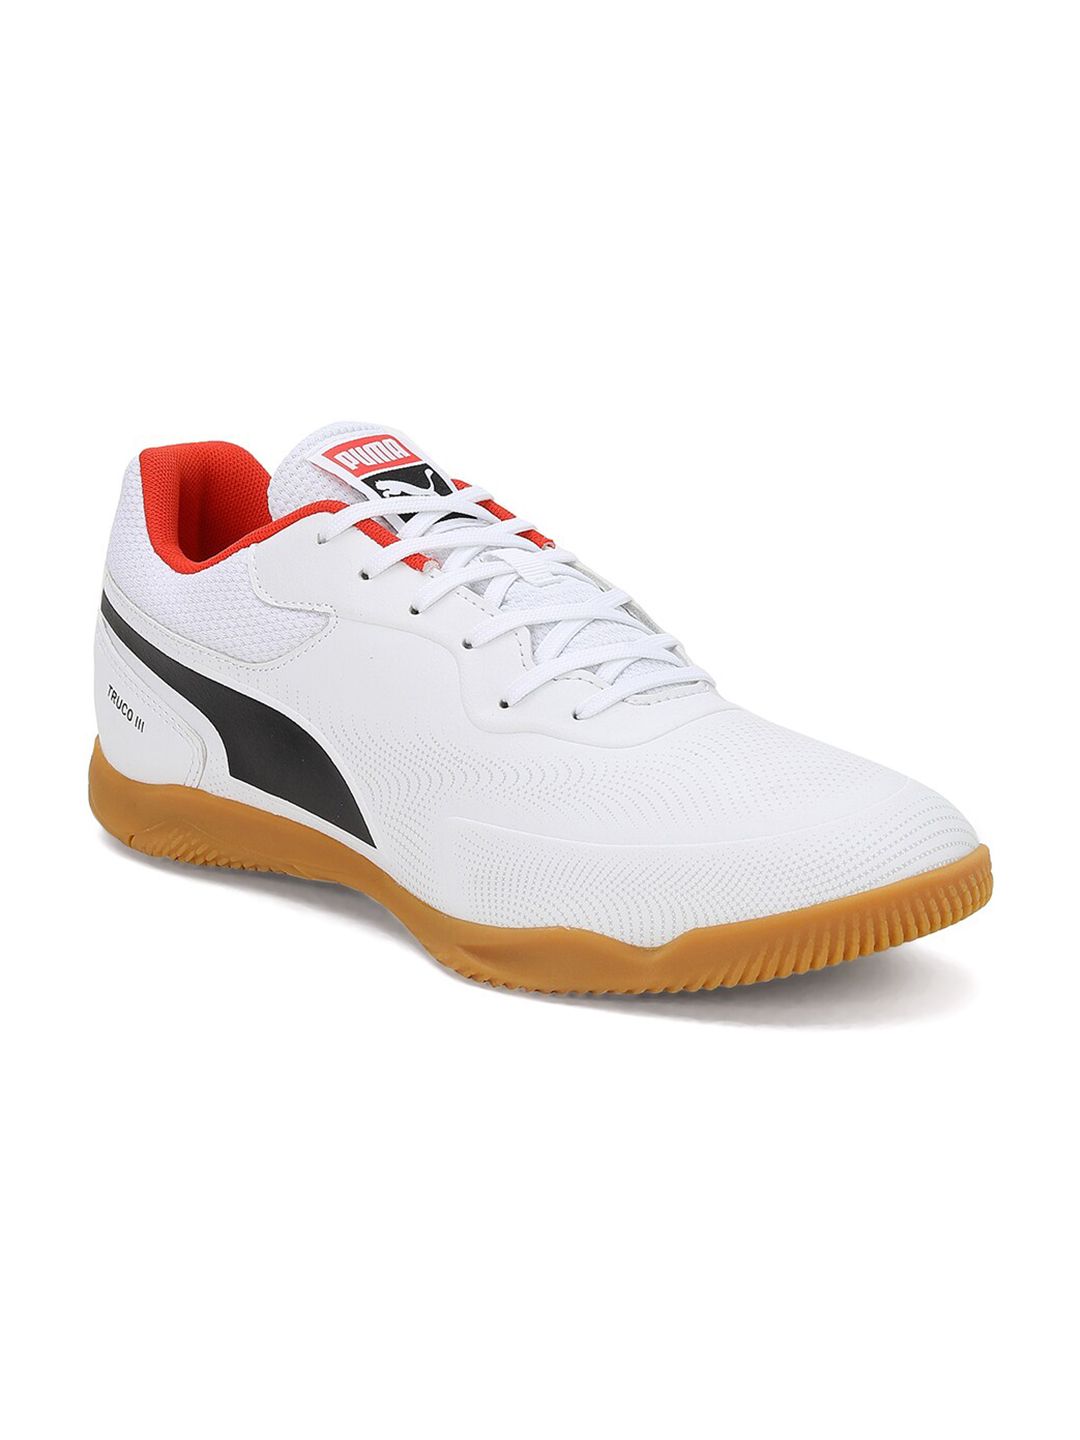 Puma Unisex White Sports Shoes Price in India